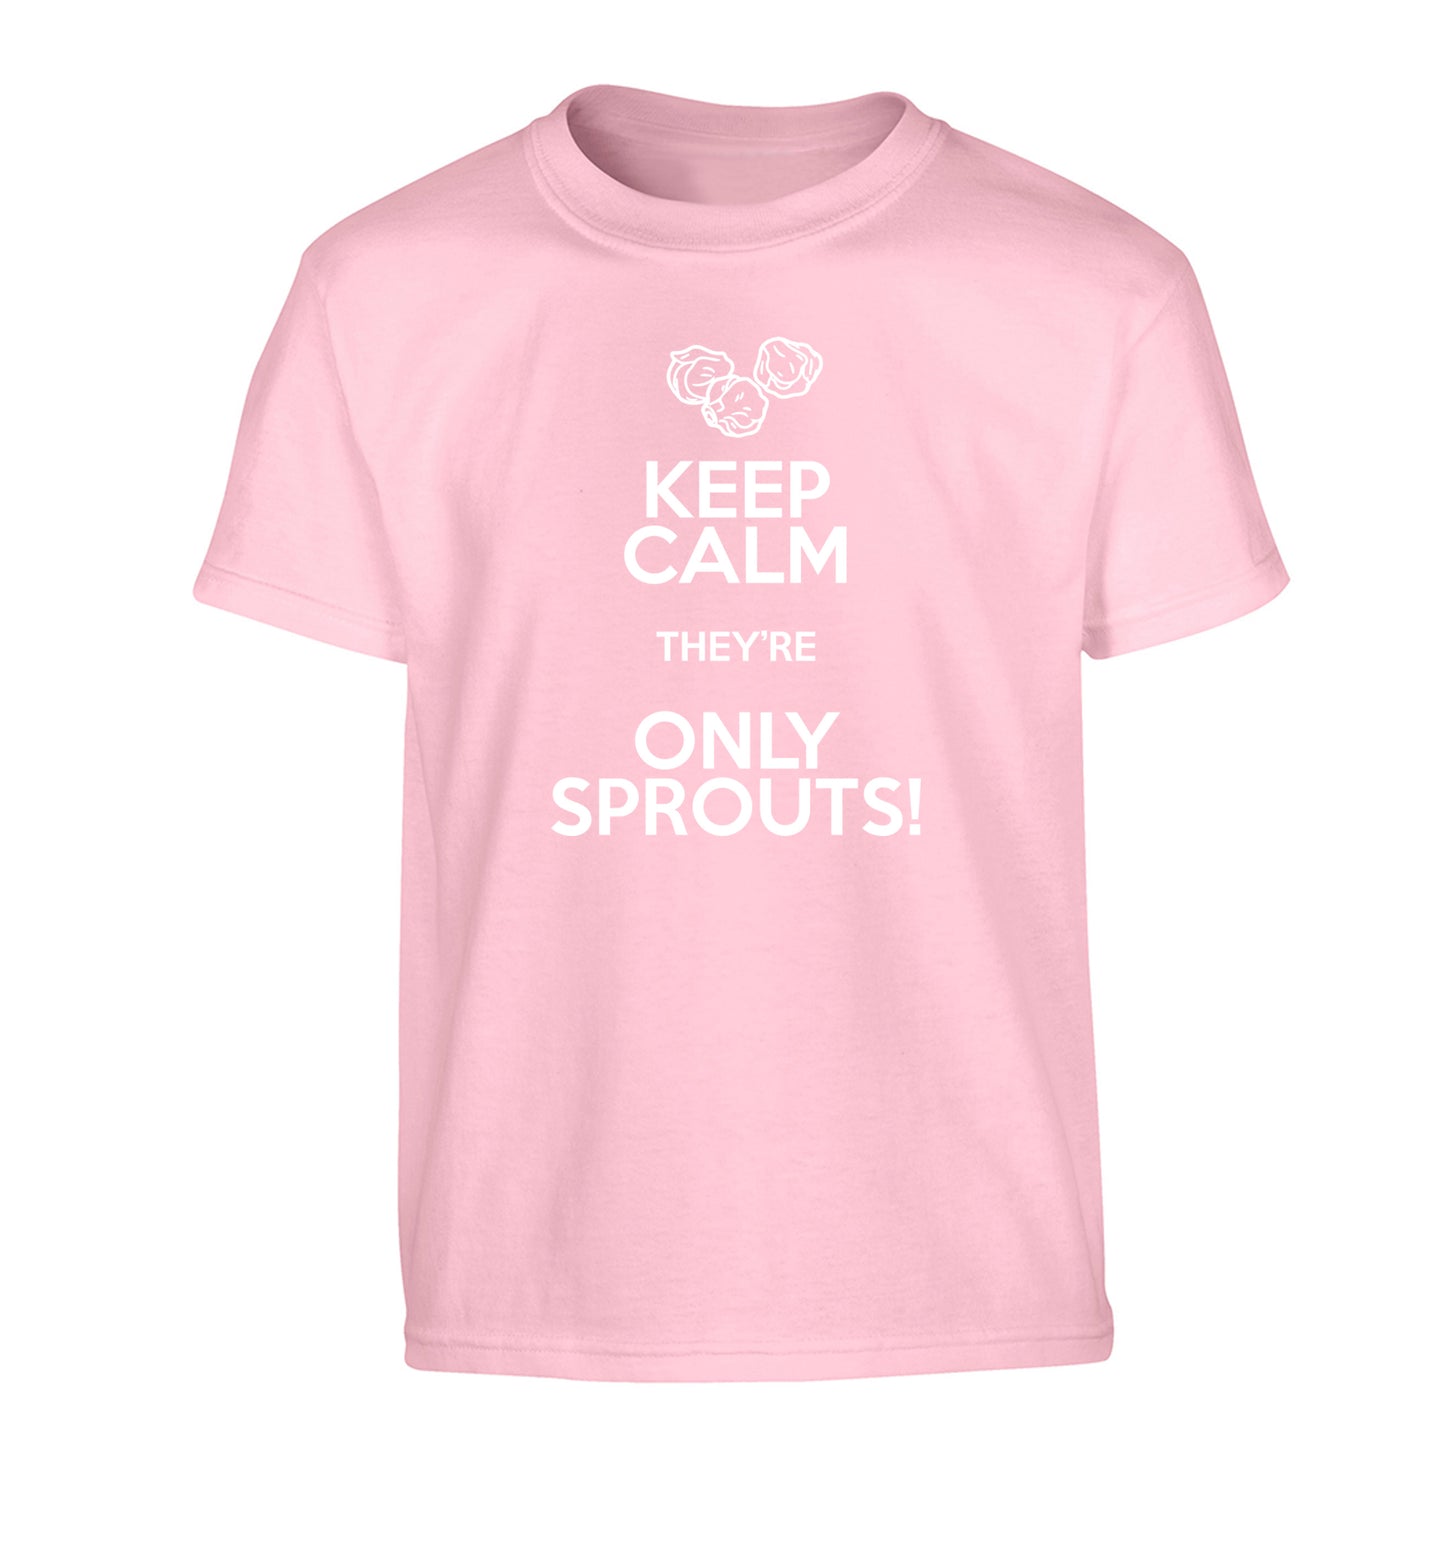 Keep calm they're only sprouts Children's light pink Tshirt 12-13 Years